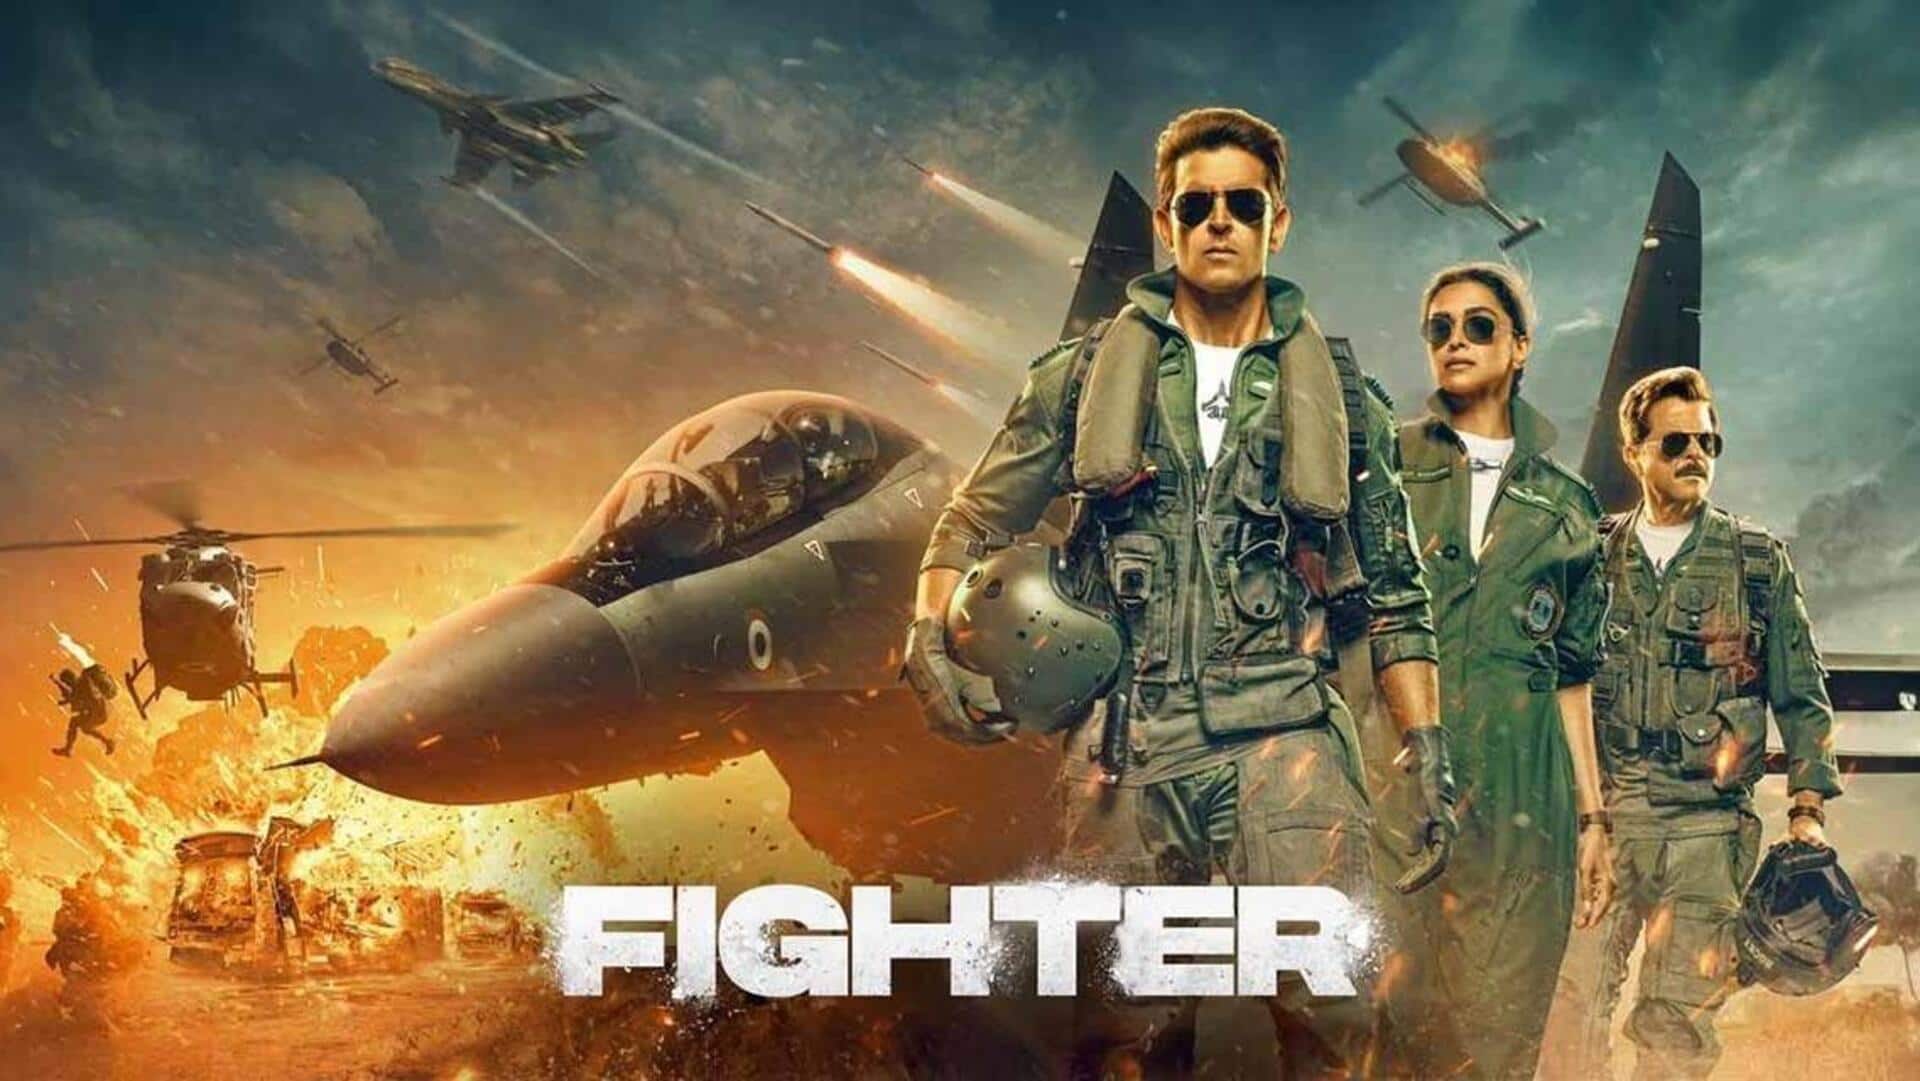 Box office collection: 'Fighter' gearing up for fifth weekend